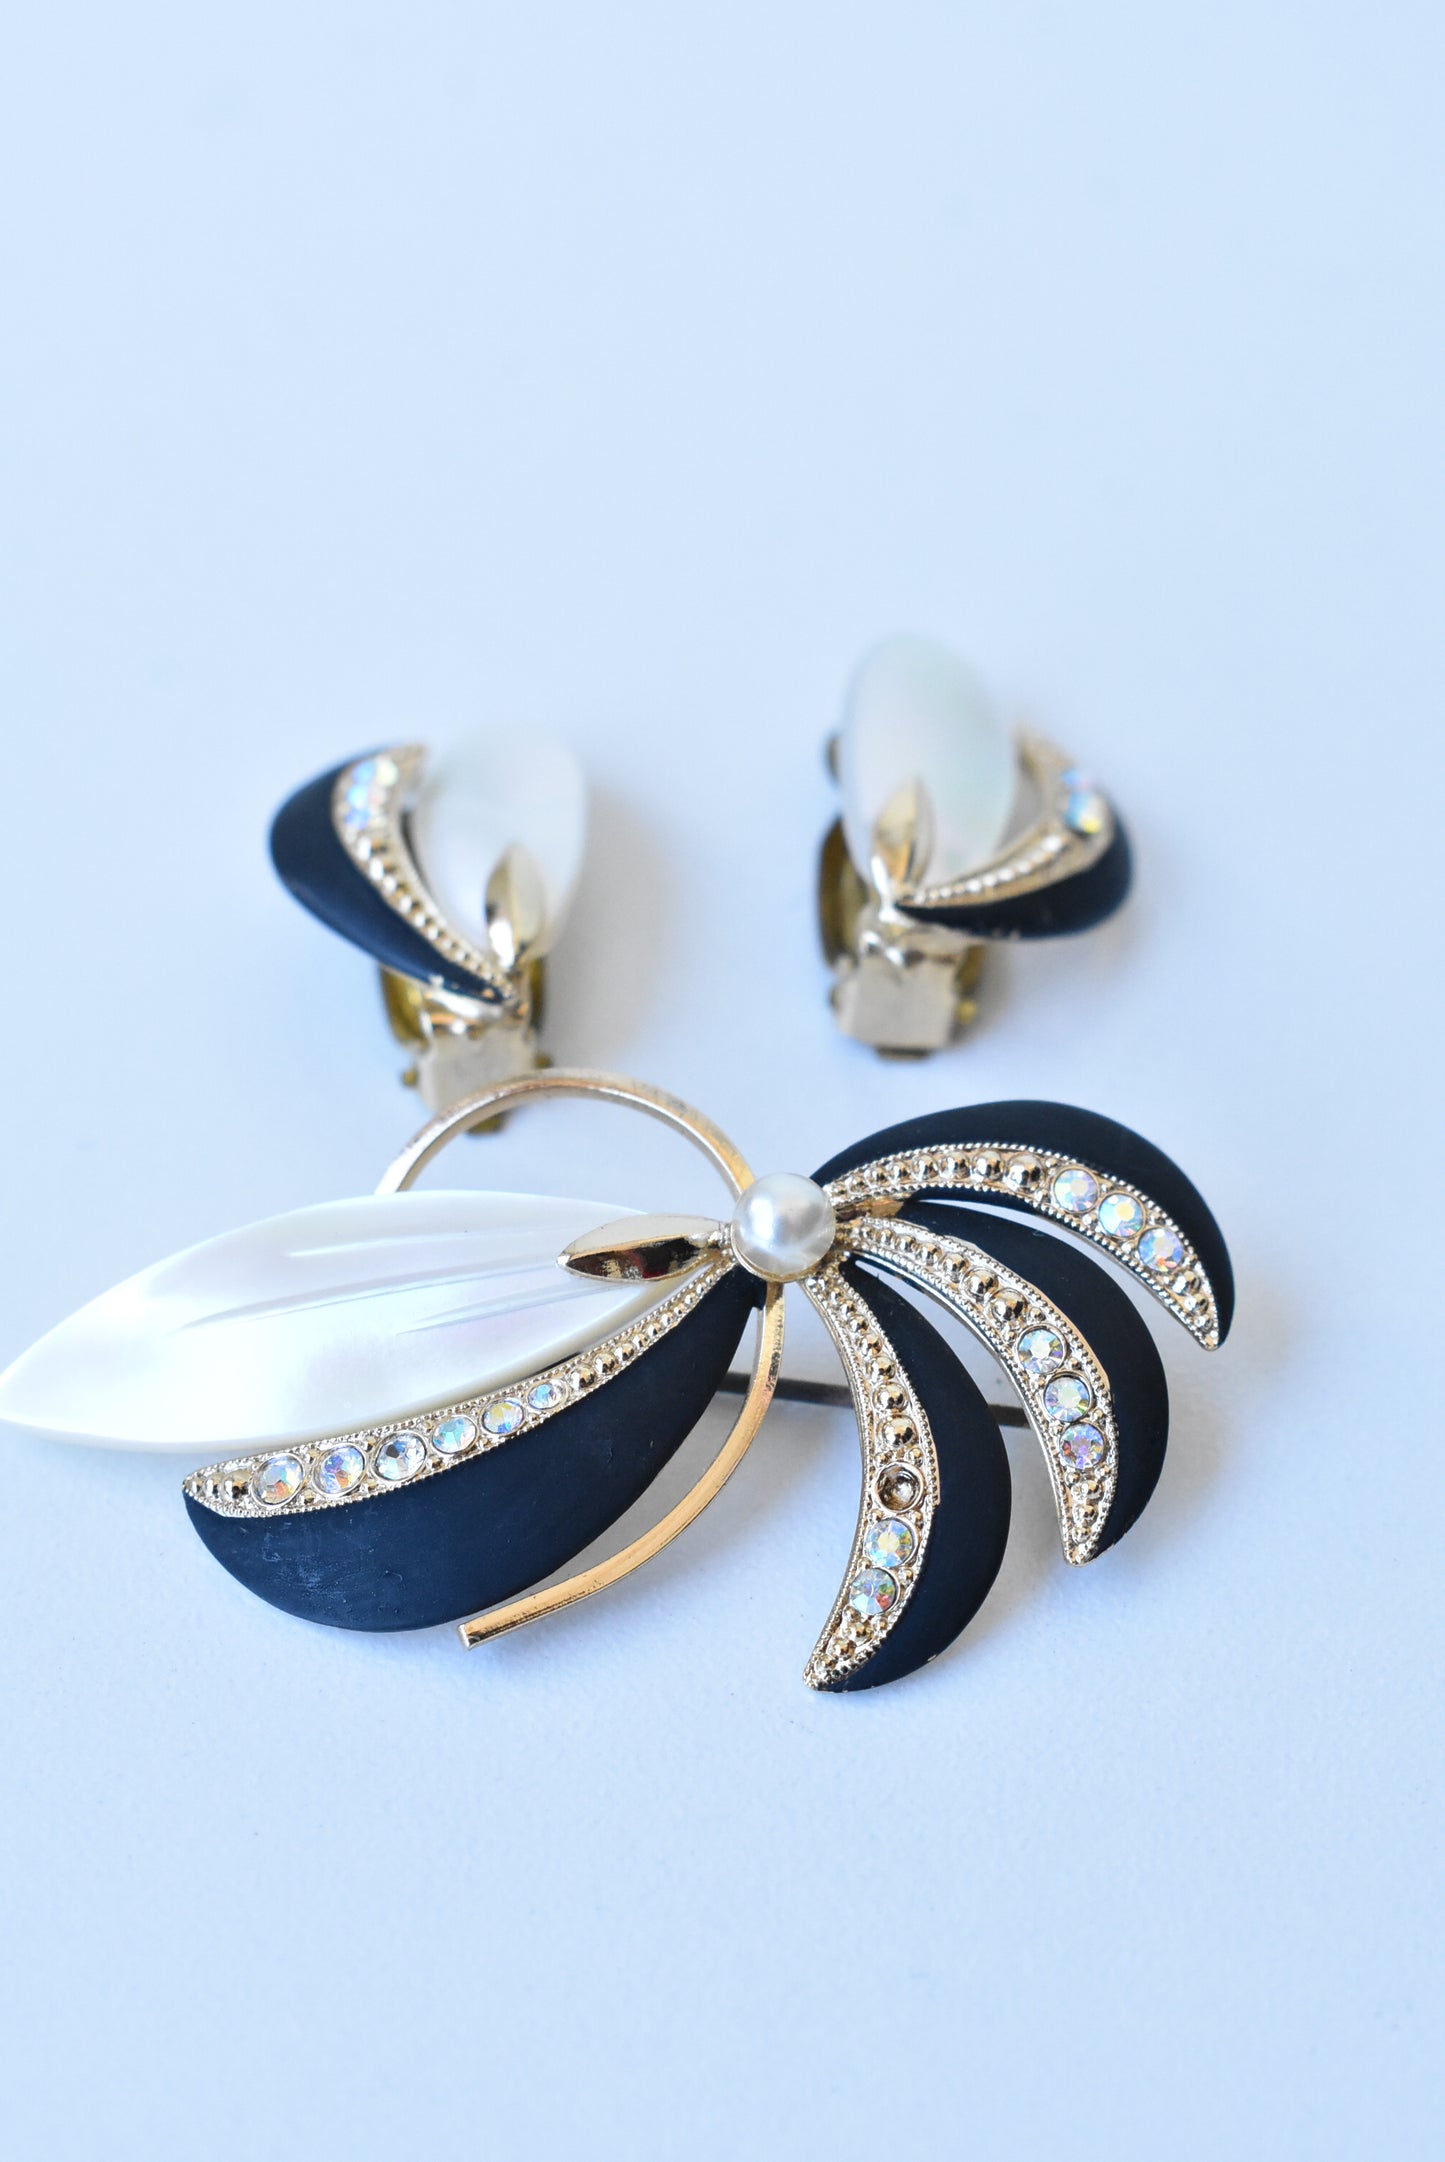 Vintage striking arched brooch and clip-on earrings